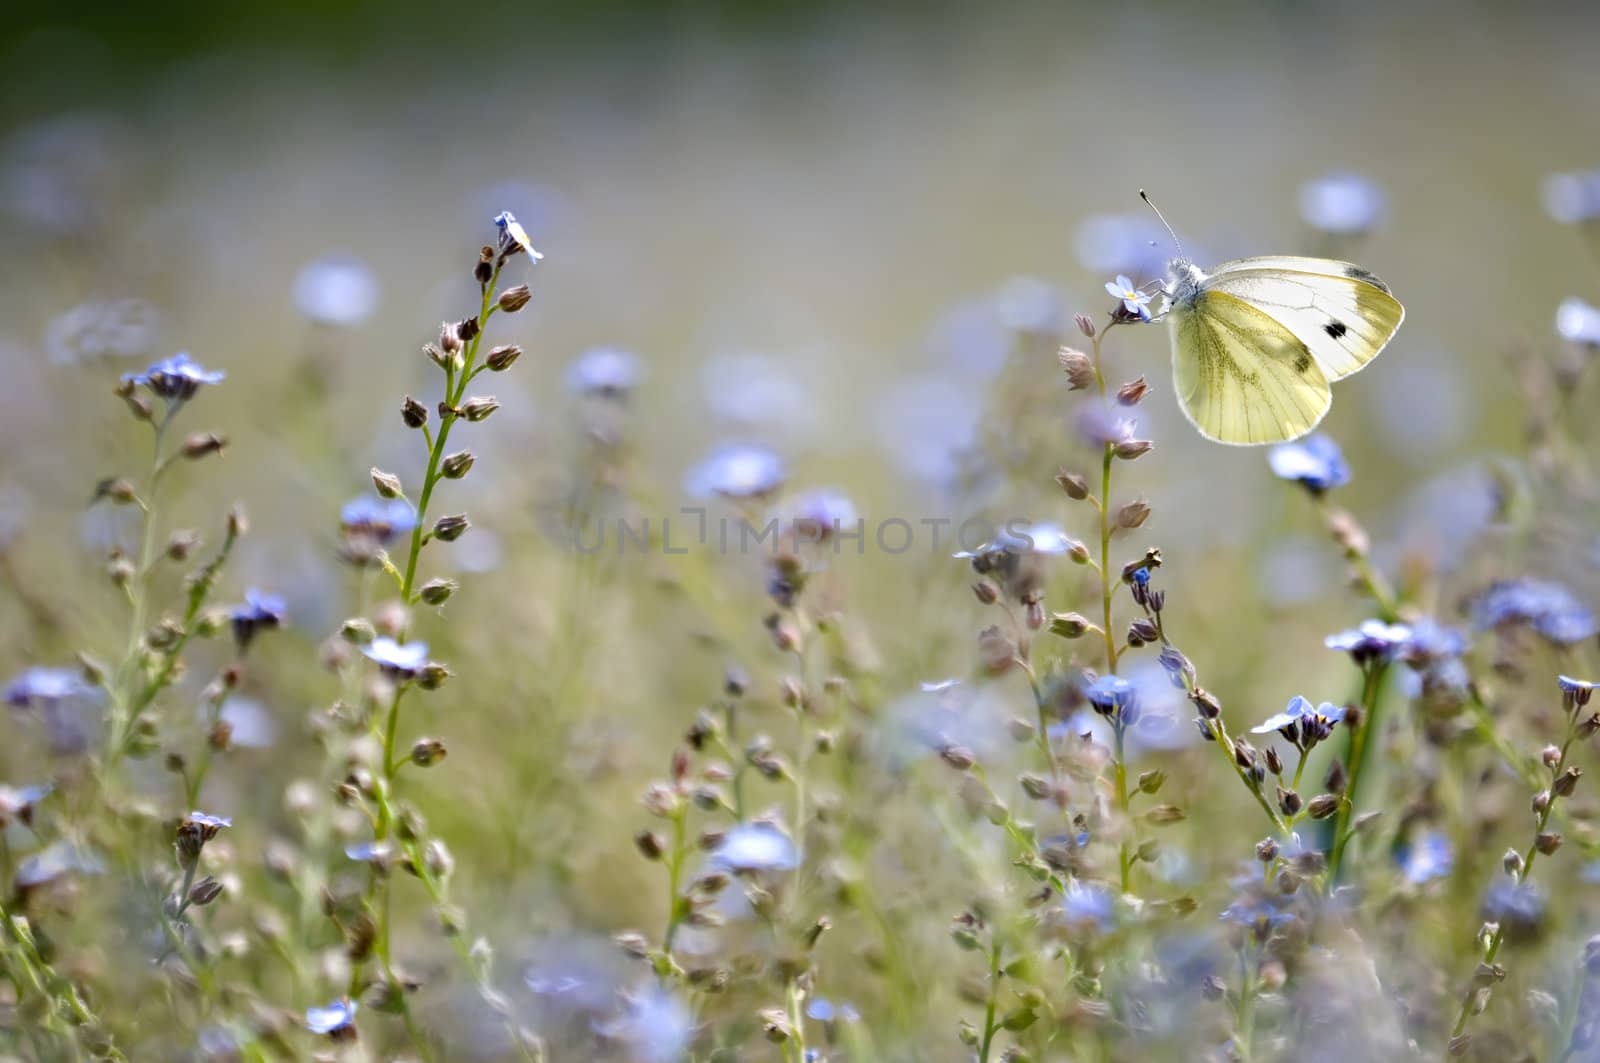 A large white butterfly in a forget-me-not field of flowers